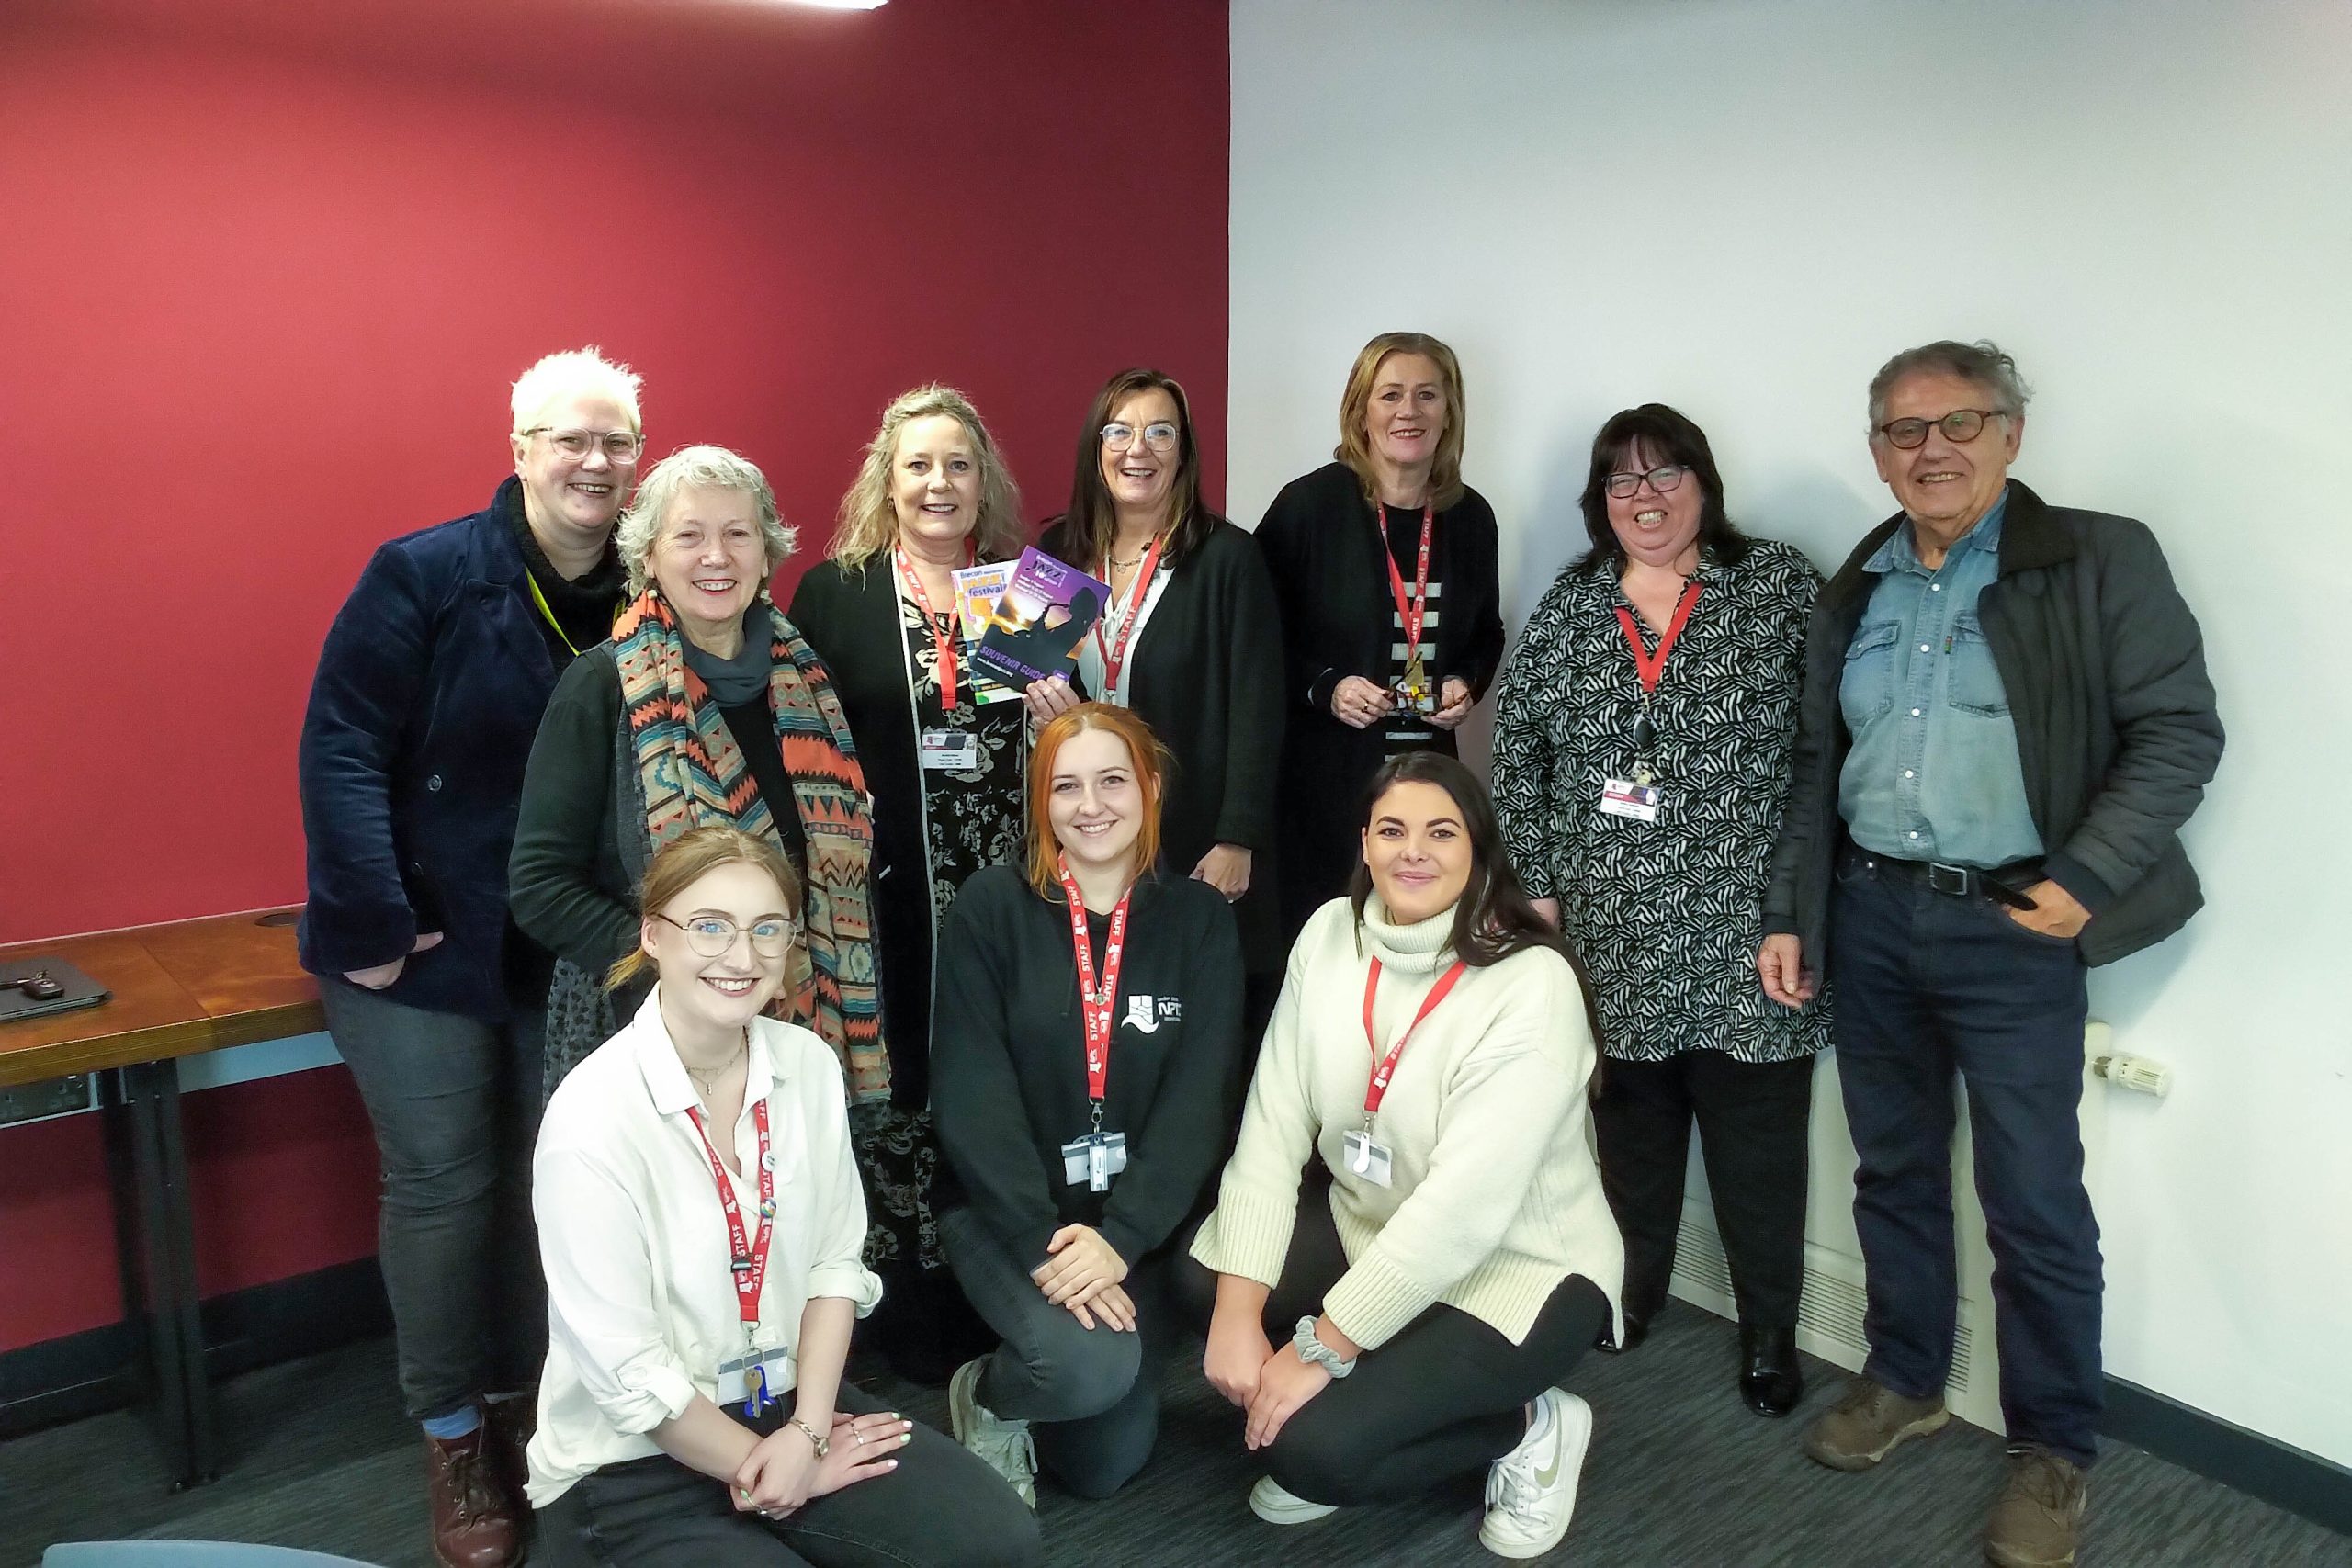 Lynne Gornall and Roger Cannon of the Brecon Jazz Festival Planning Team are pictured with the College team who are helping to organise the Jazz Taster Day.